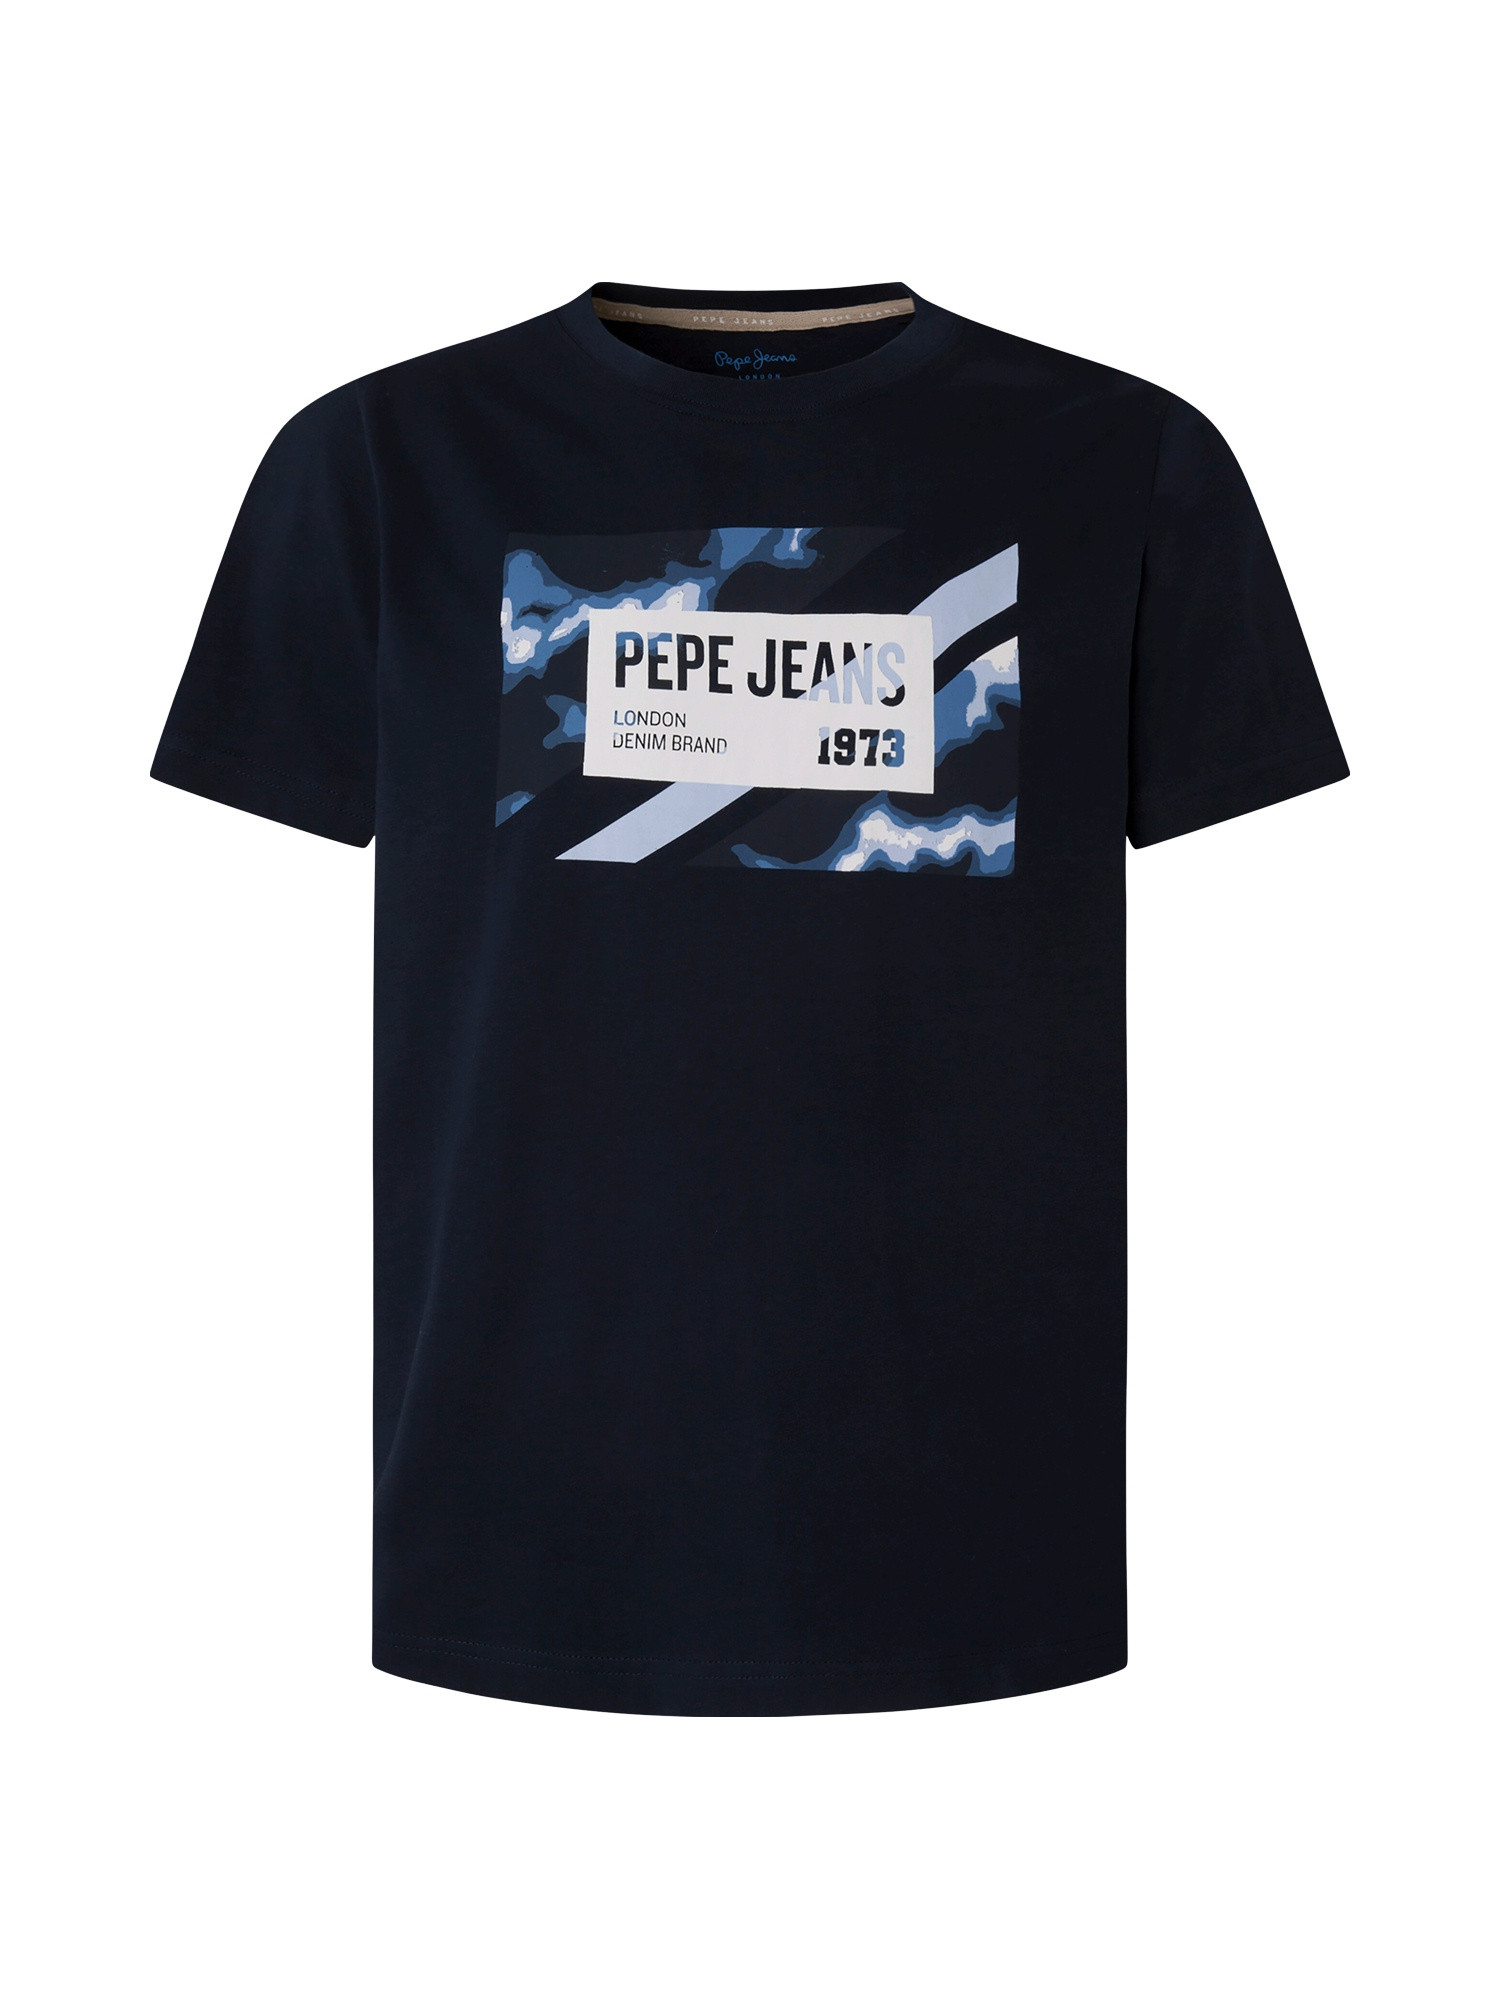 Pepe Jeans - T-shirt con stampa in cotone, Blu scuro, large image number 0